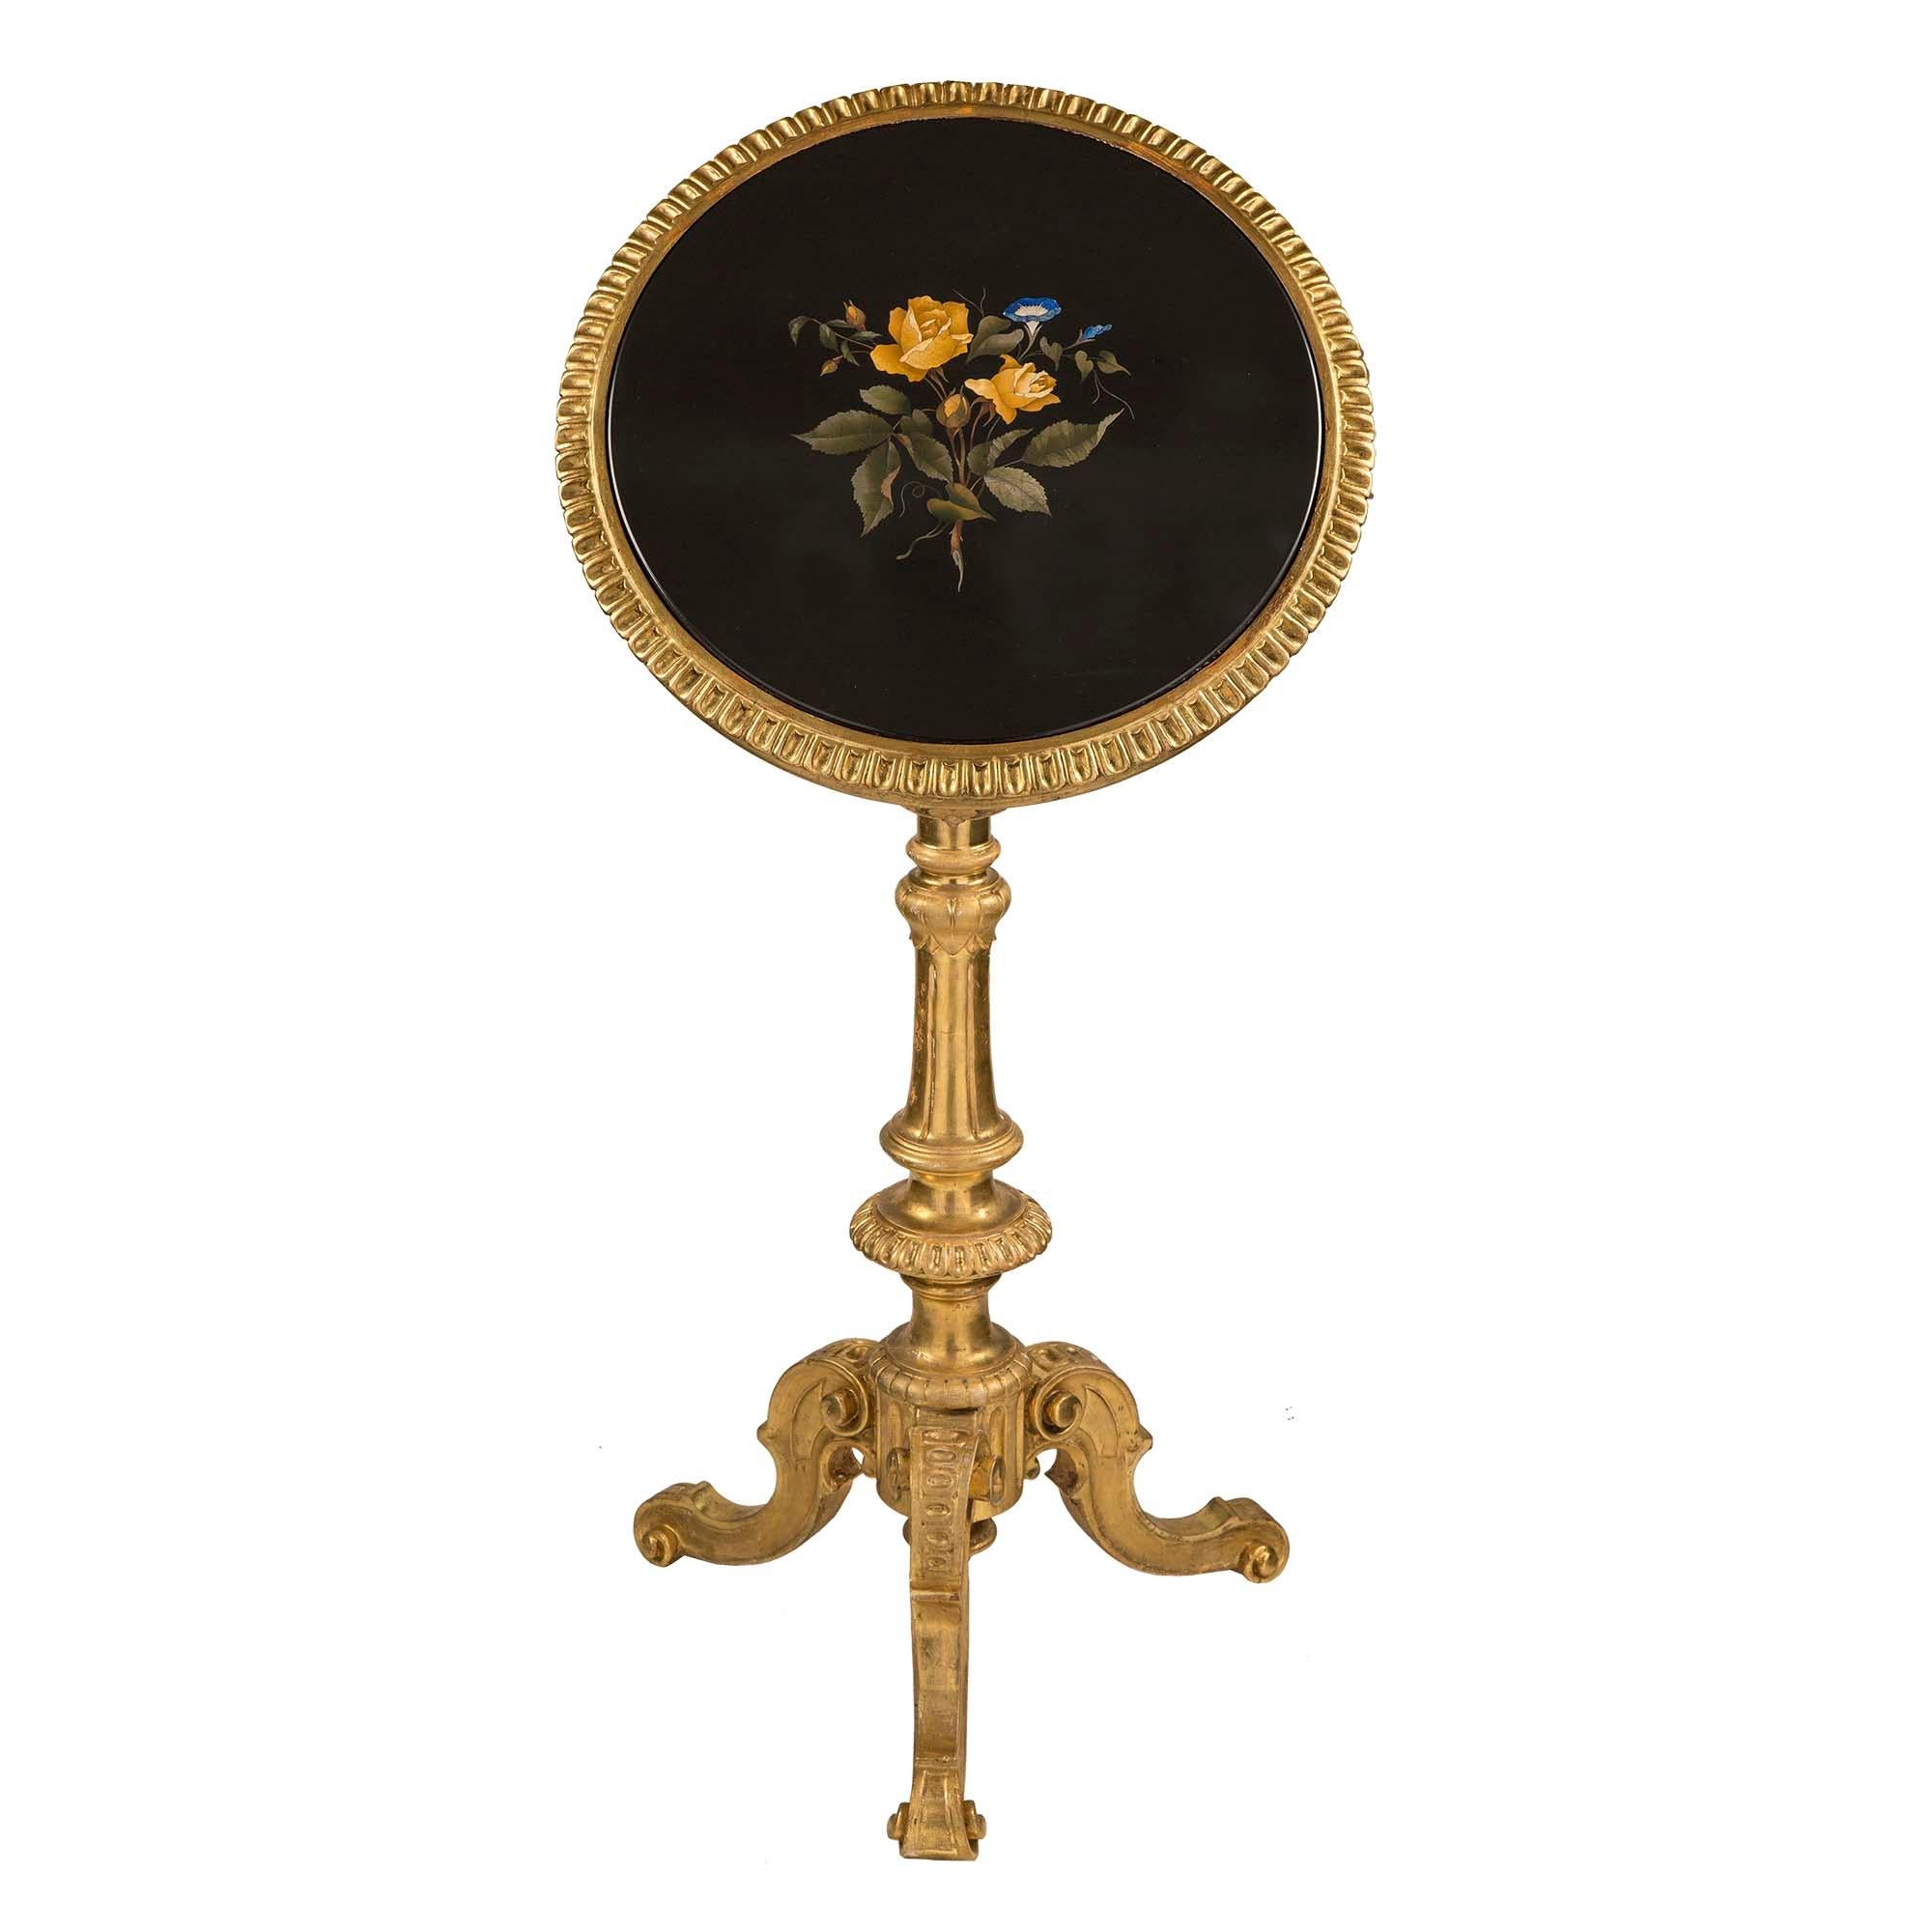 A stunning Italian 19th century rare and unusual tilt top Florentine side table. The table is raised on scrolled tripod with fluted and carved central column. At the circular giltwood, frieze are scalloped designs and fluted top band. All below the